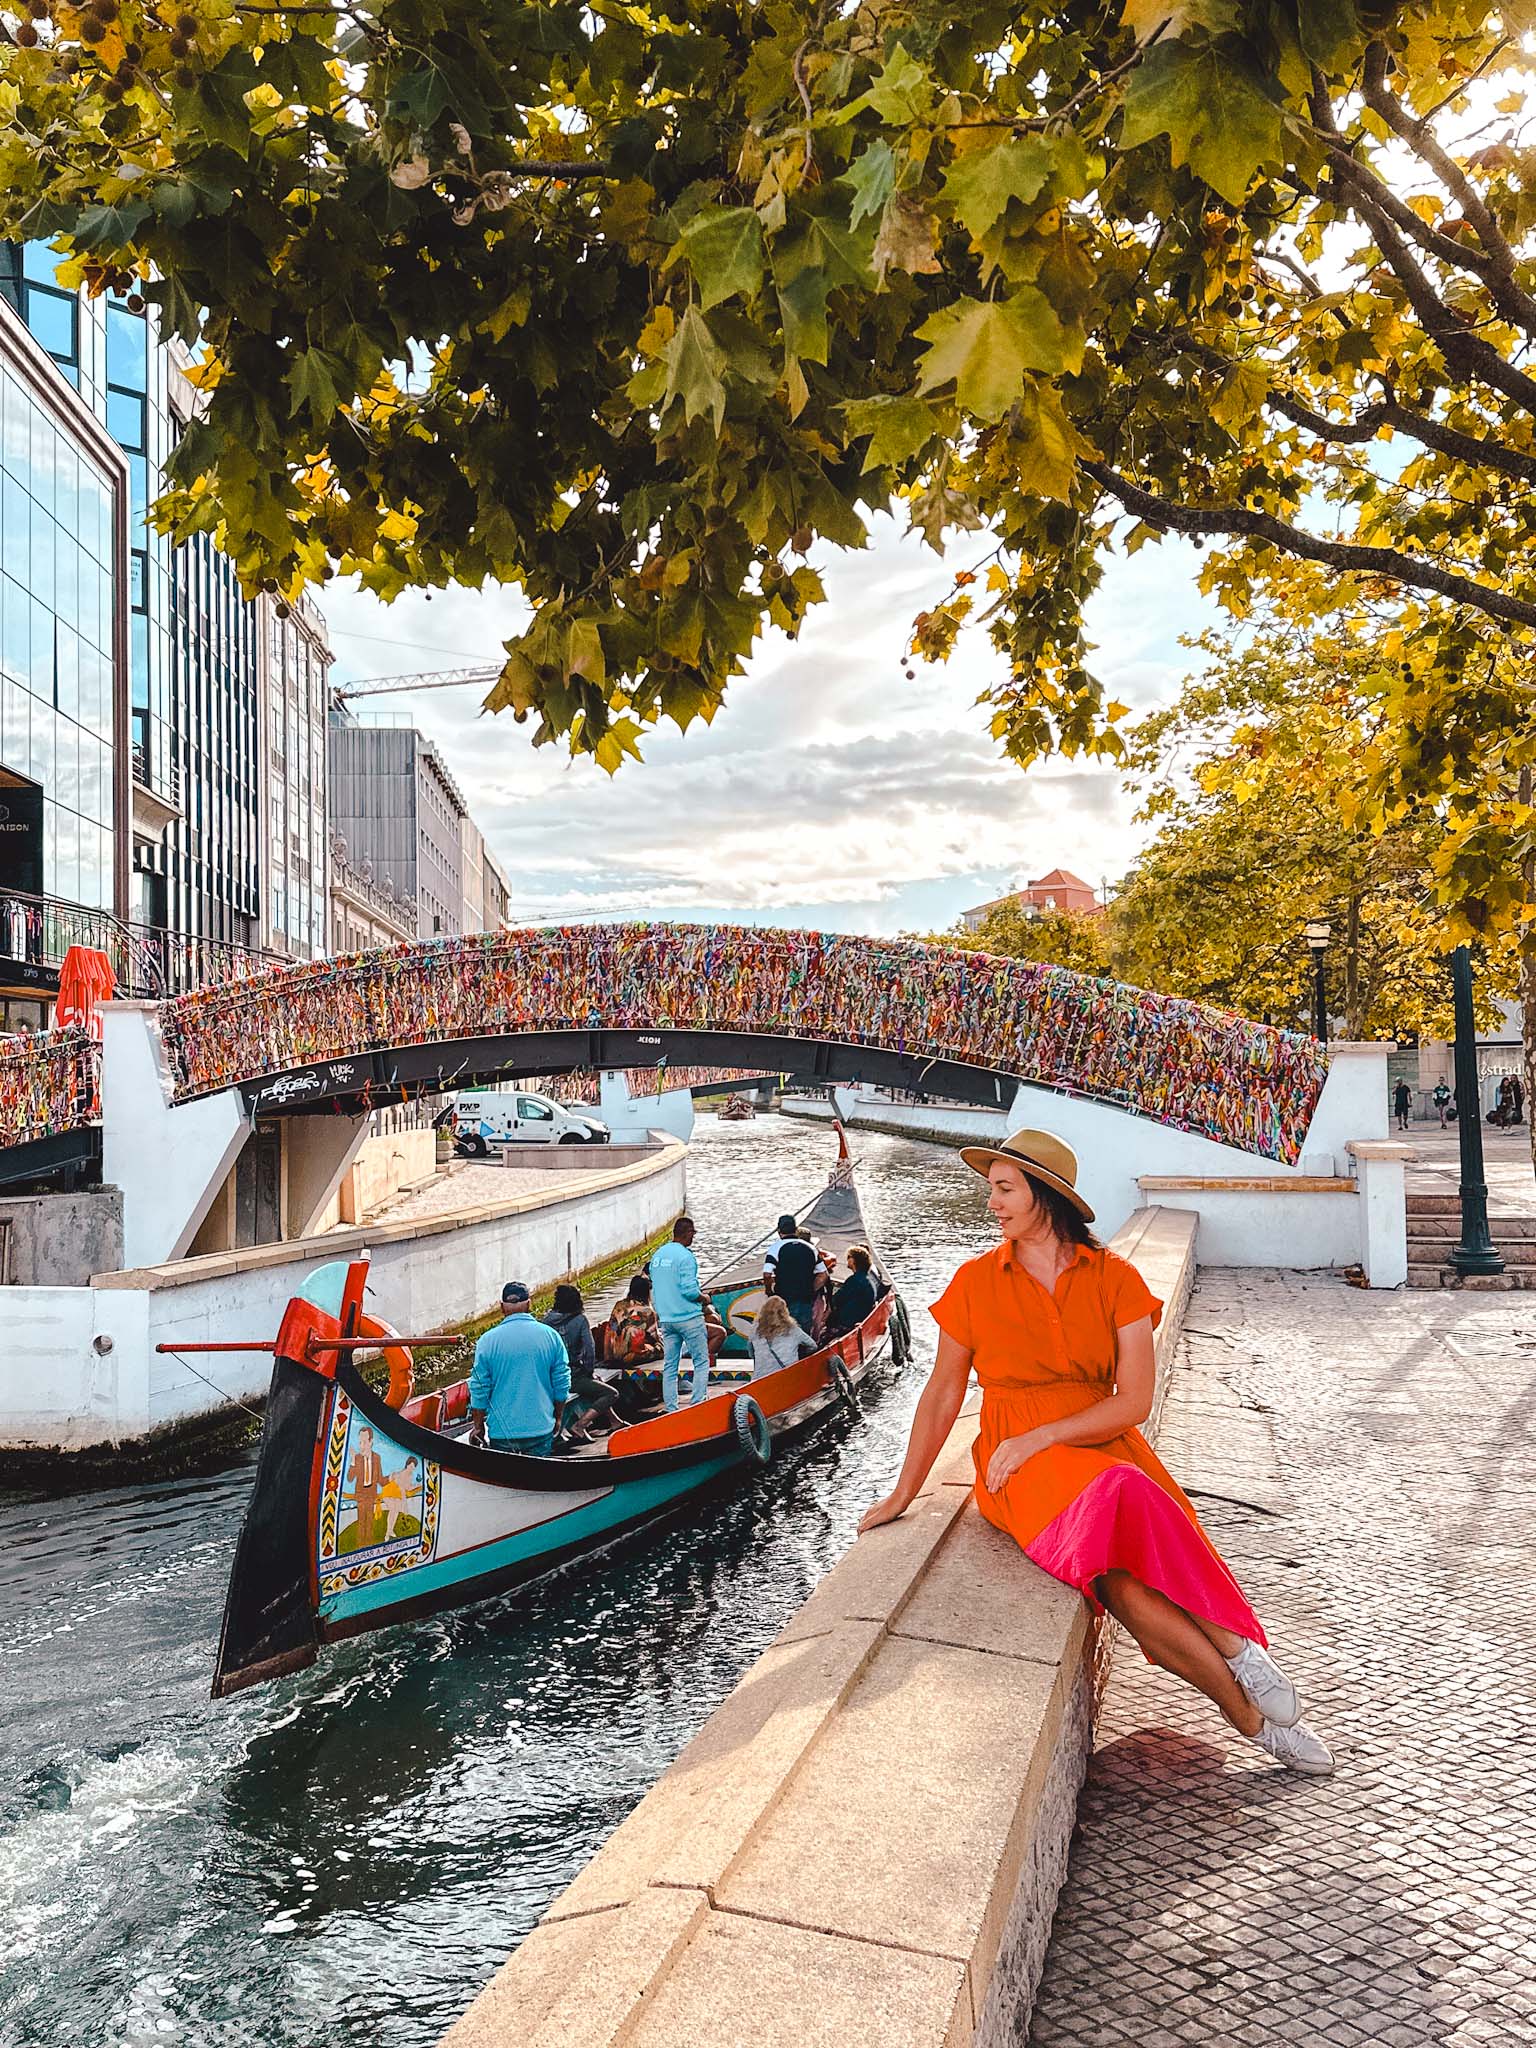 Best Instagram spots in Aveiro, Portugal - friendship bridge with colorful ribbons